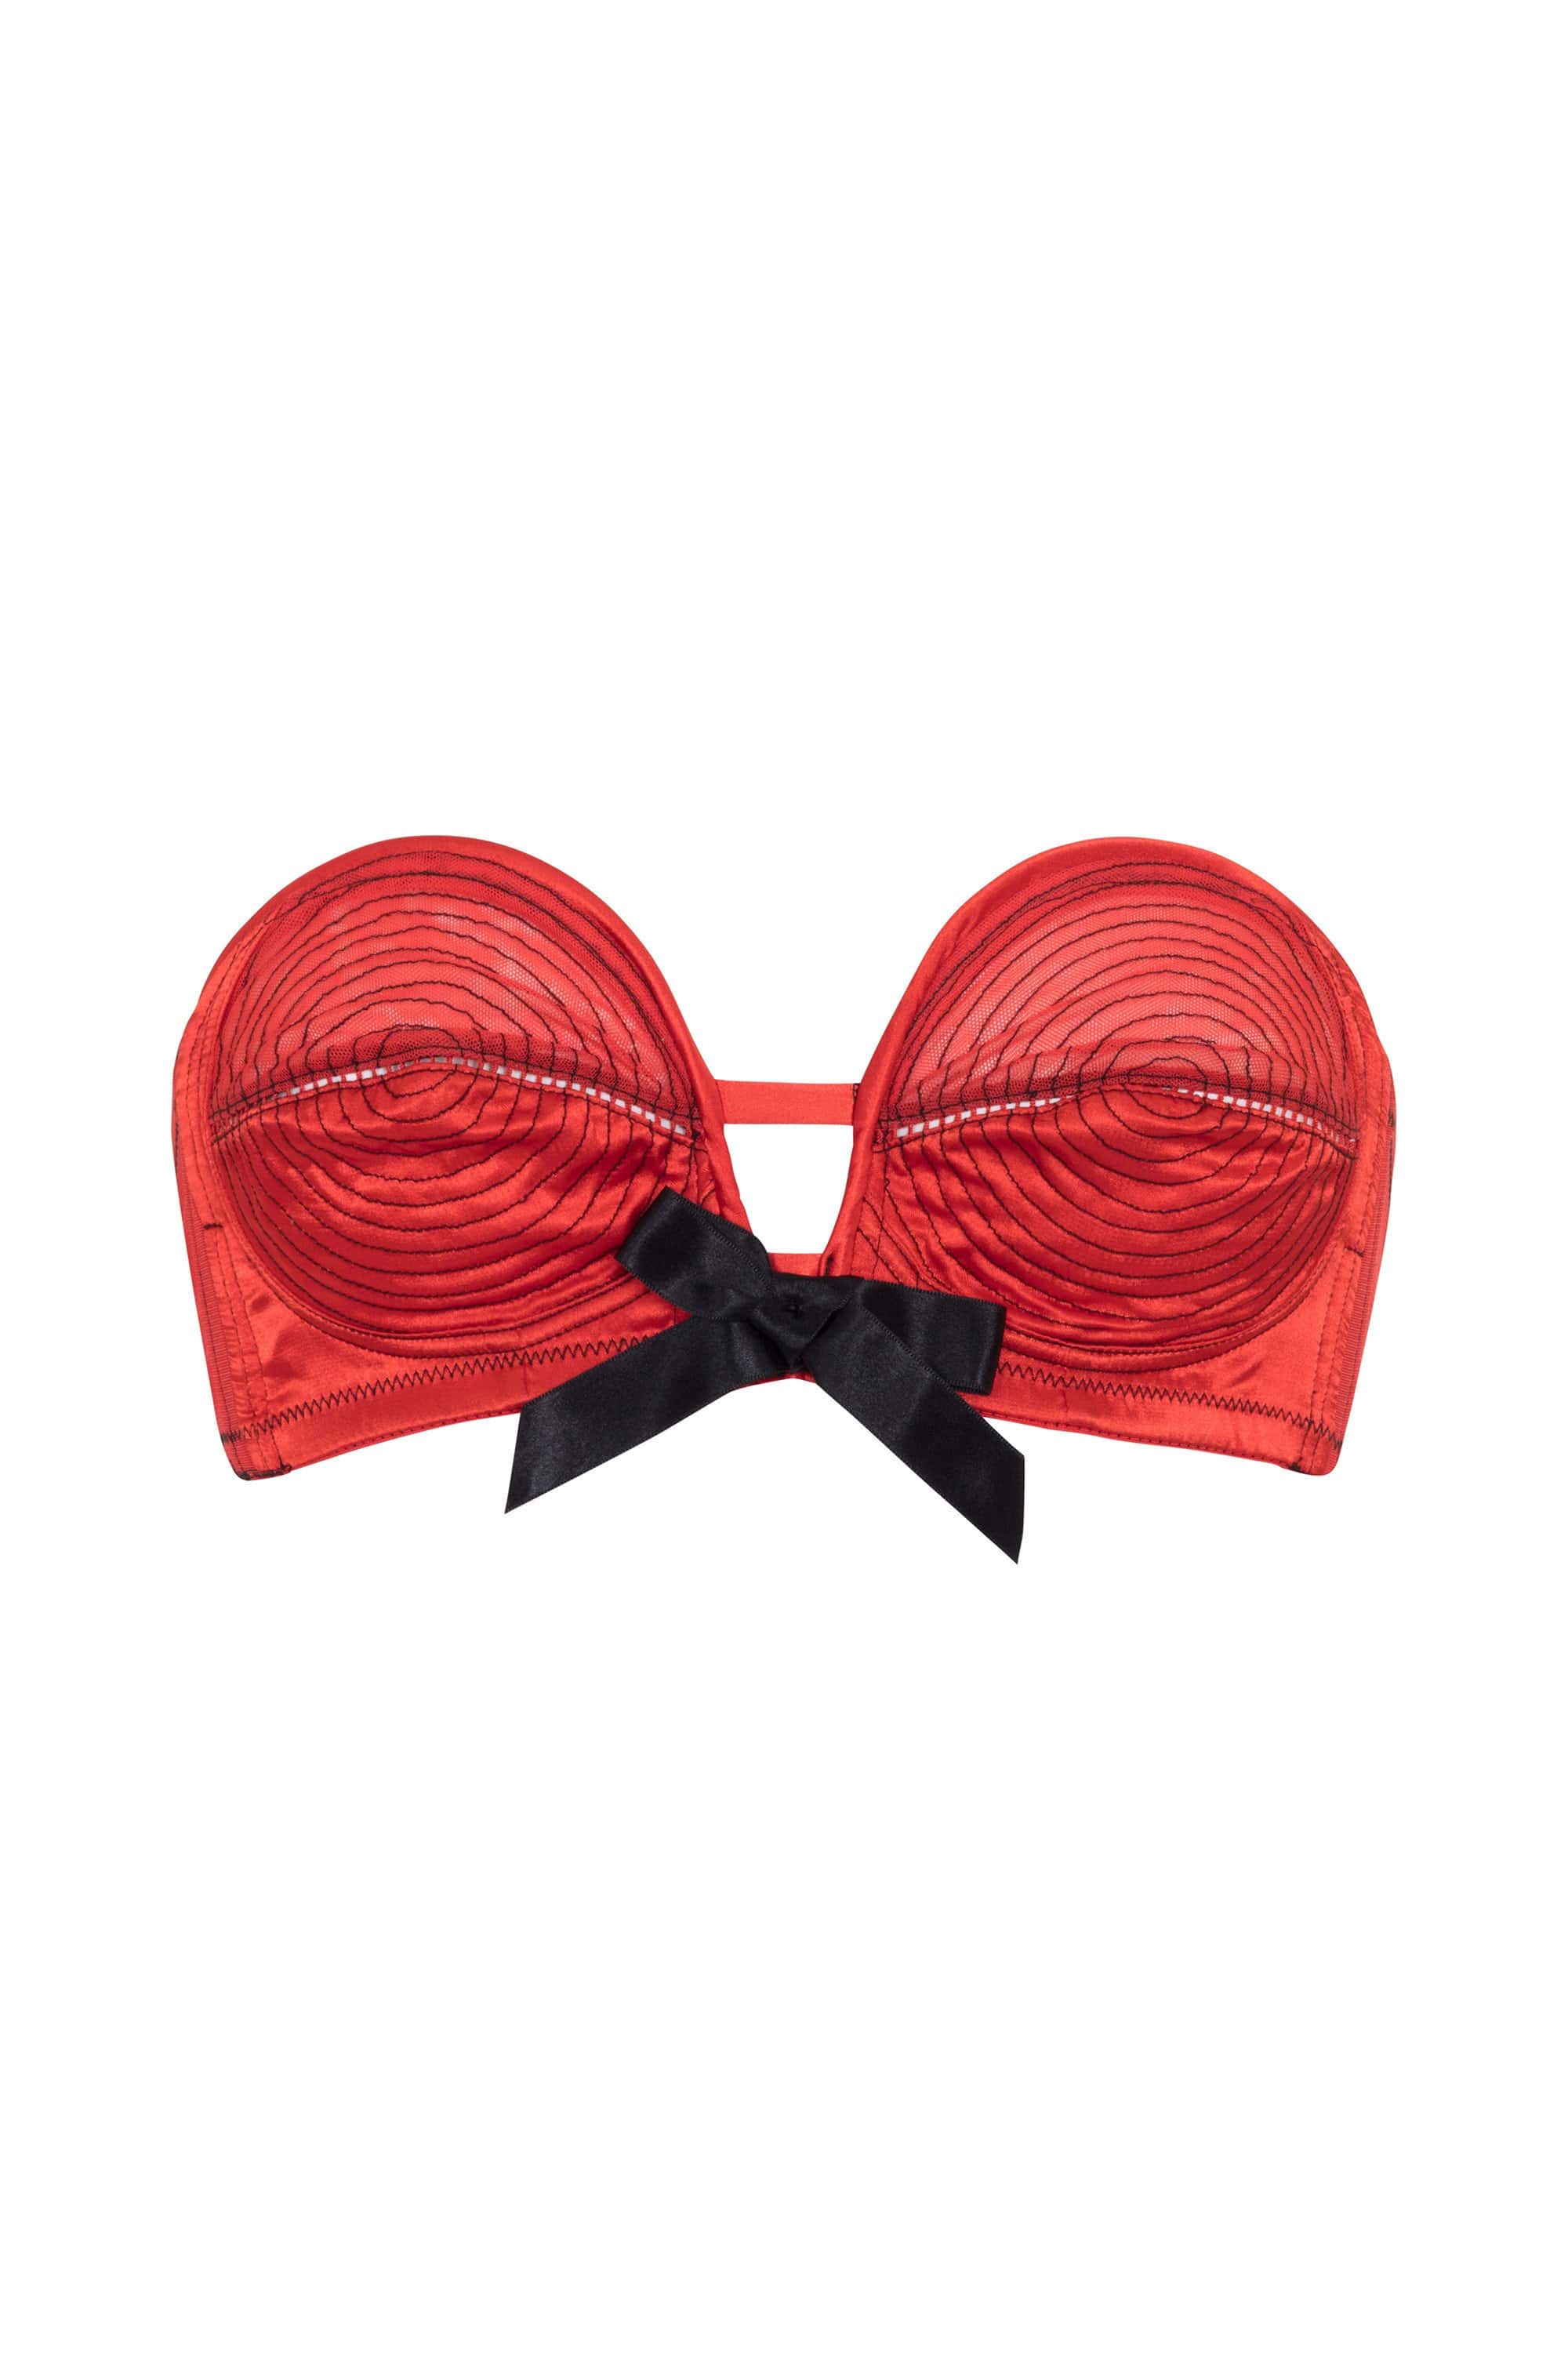 Bettie Page Red/Black Overwire Bra A - DD/E – Playful Promises USA